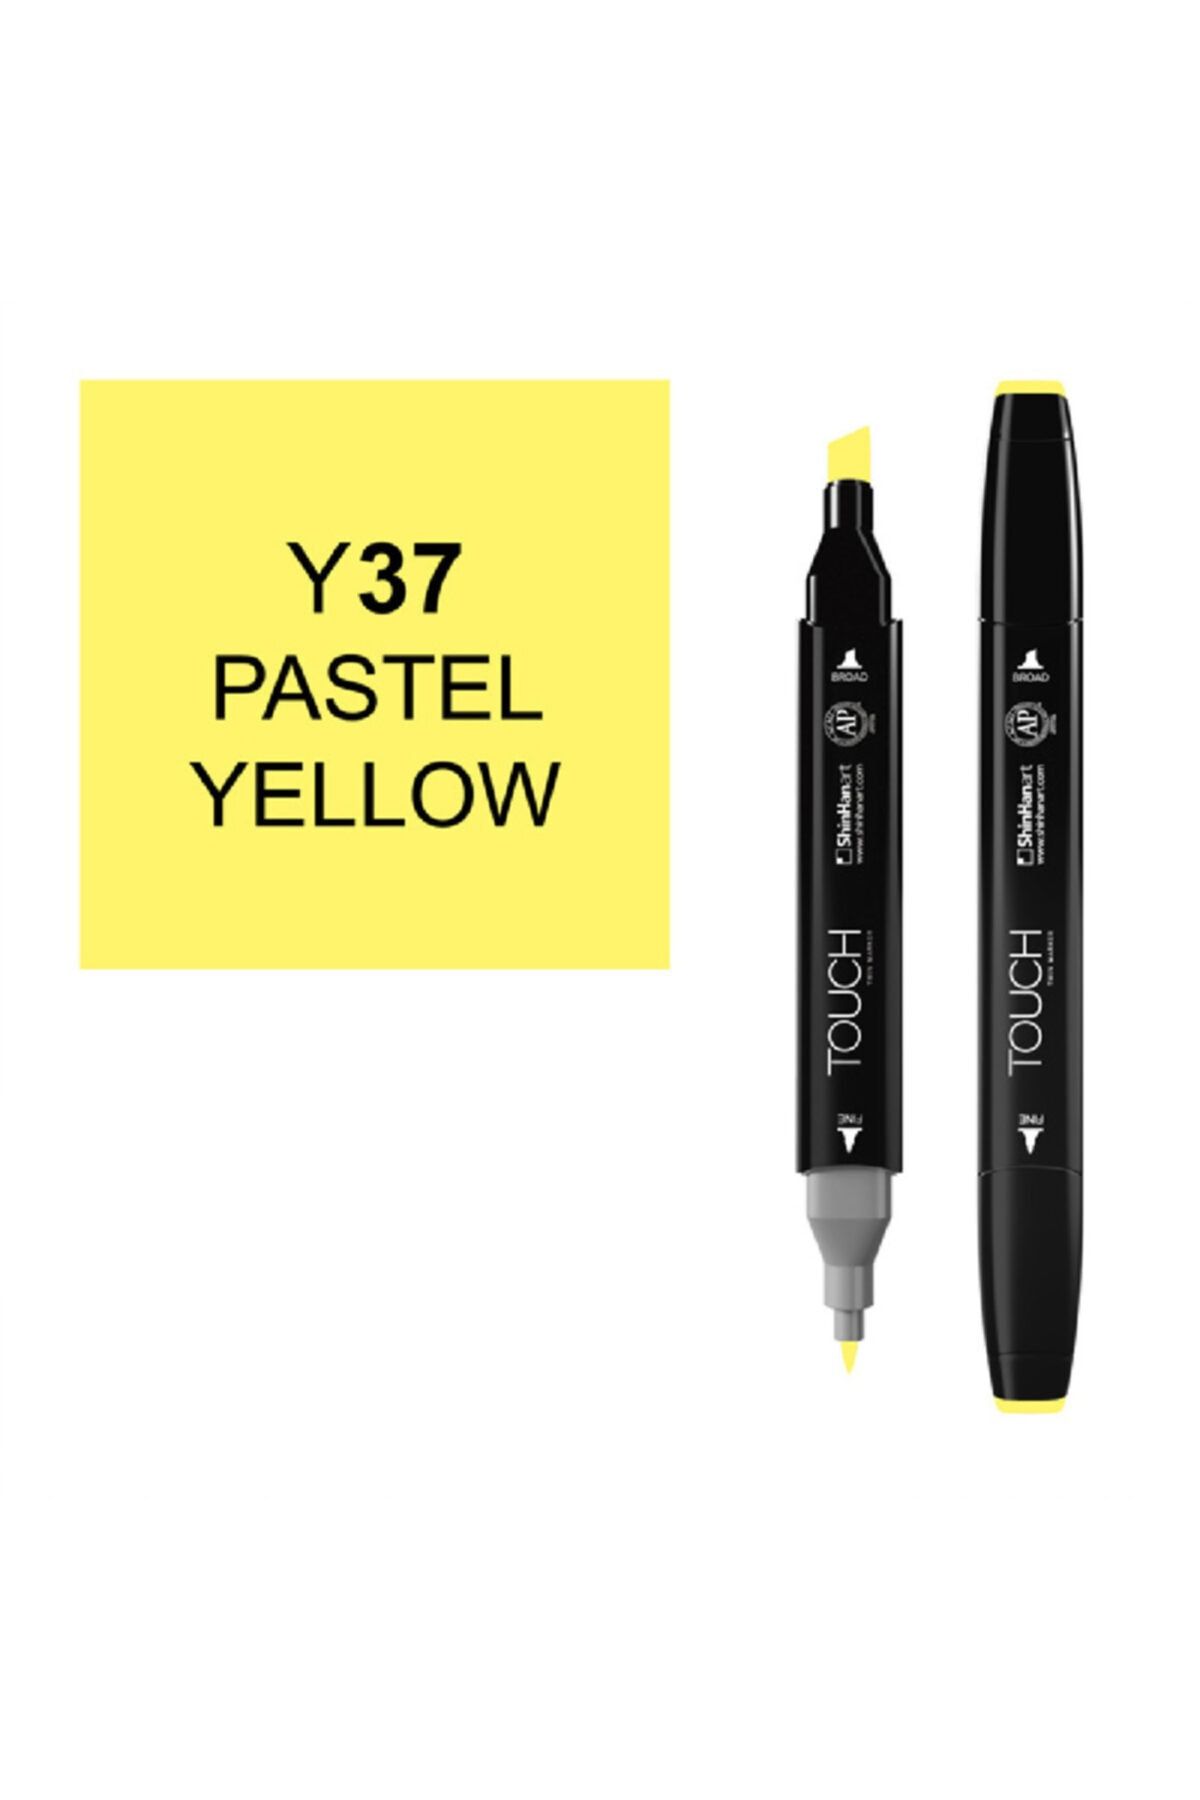 Ponart Touch Twin Y37 Pastel Yellow Marker Sh1110037